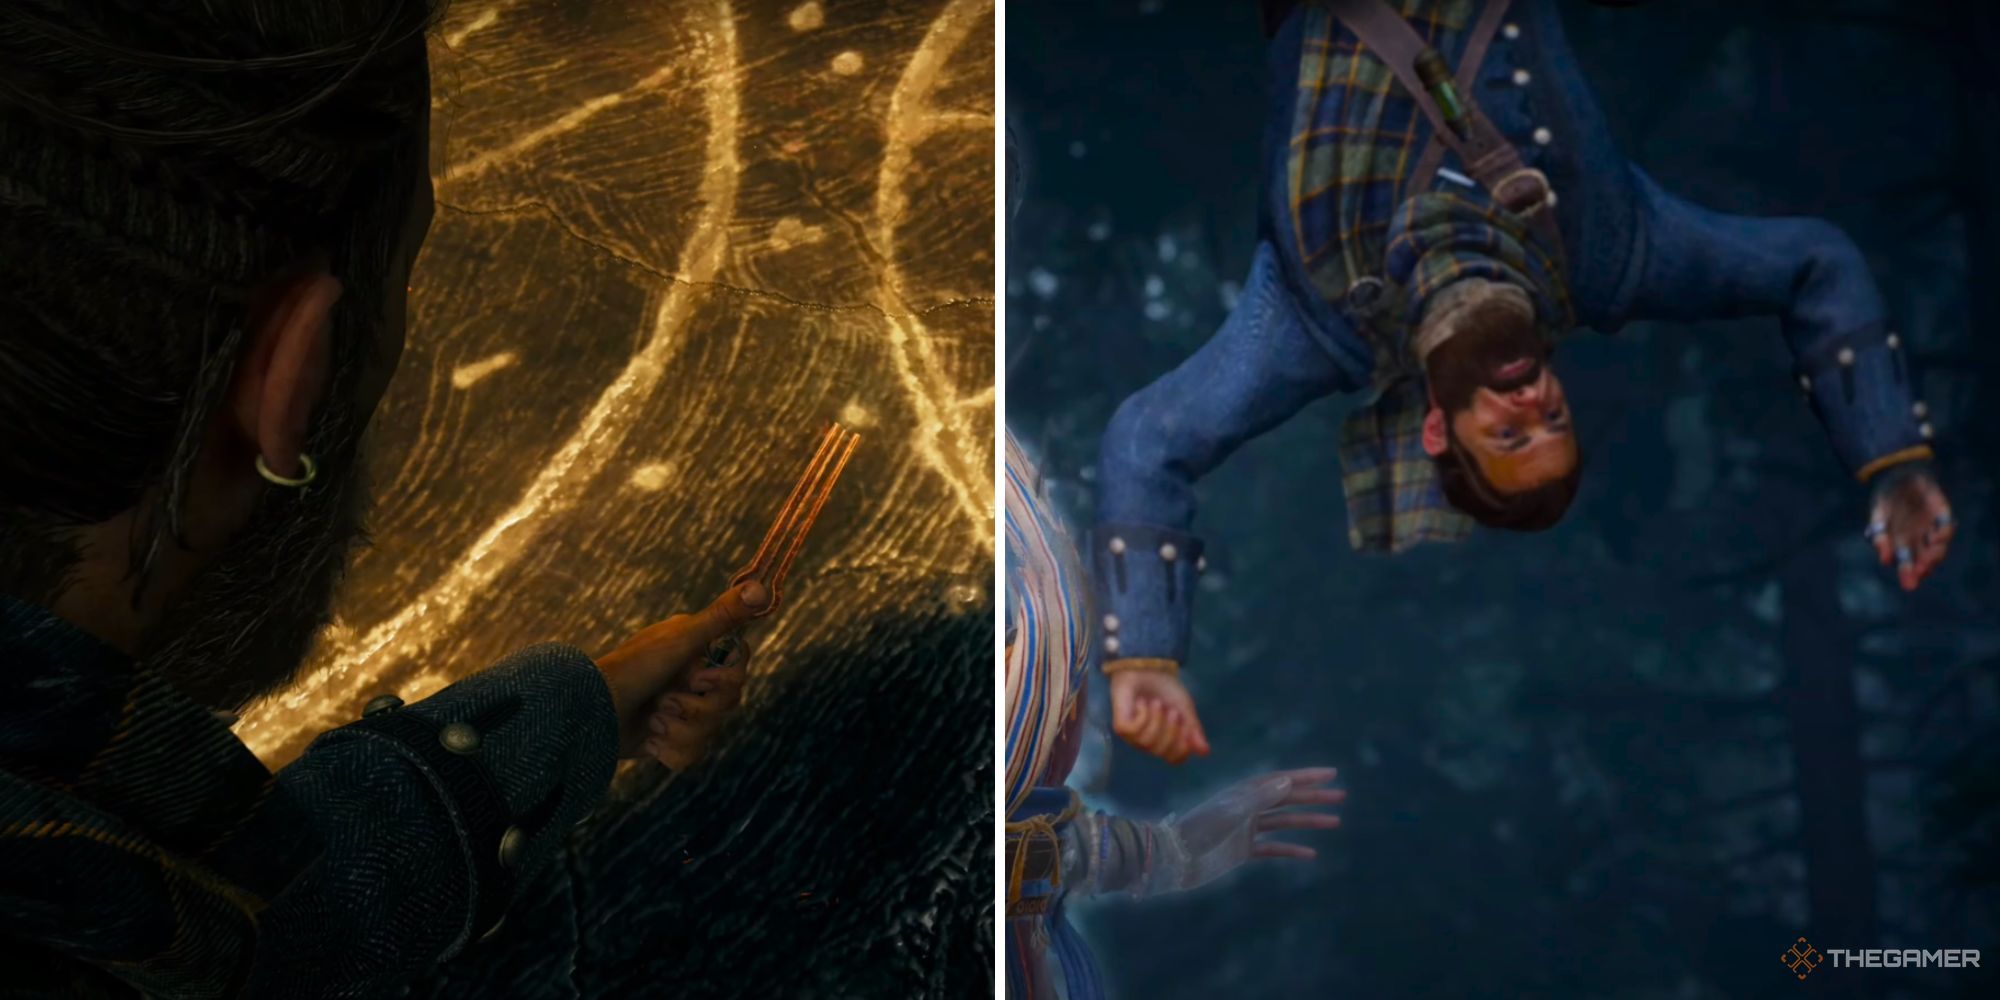 A split image of Red holding a key to a Void portal, and Red hanging from a rope tied around his ankle.